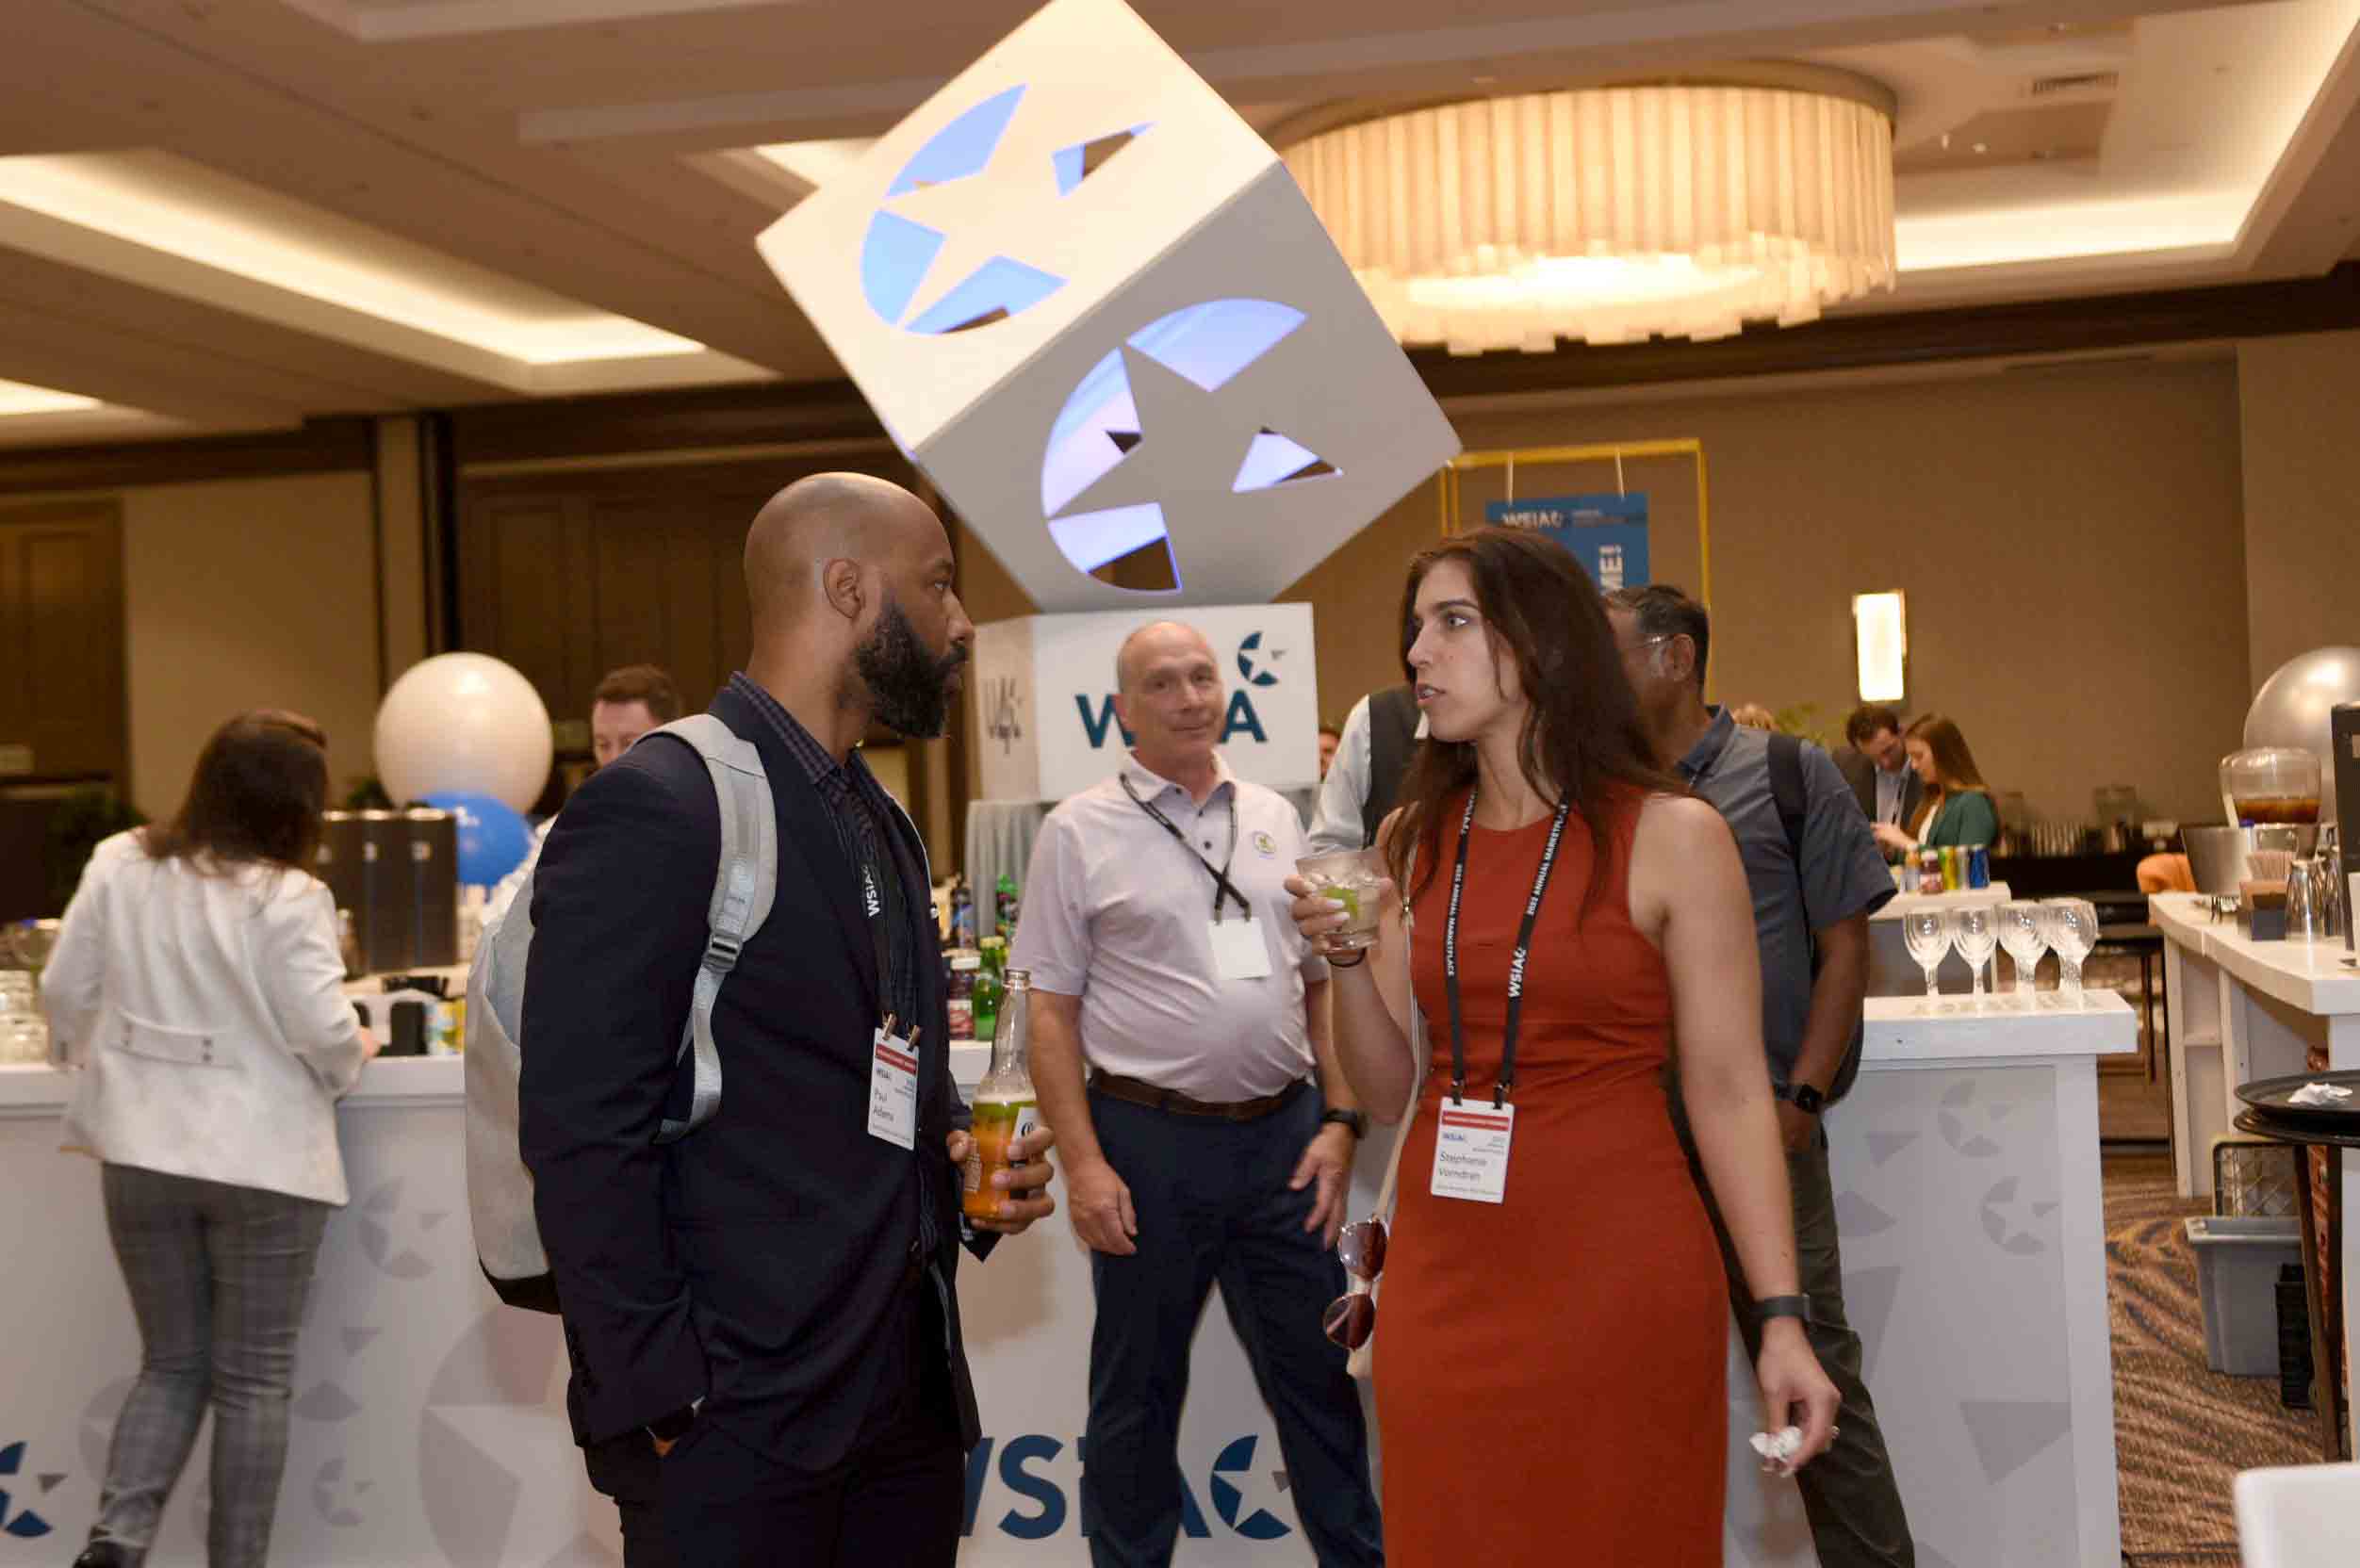 WSIA 2022 Highlights From The Field PropertyCasualty360